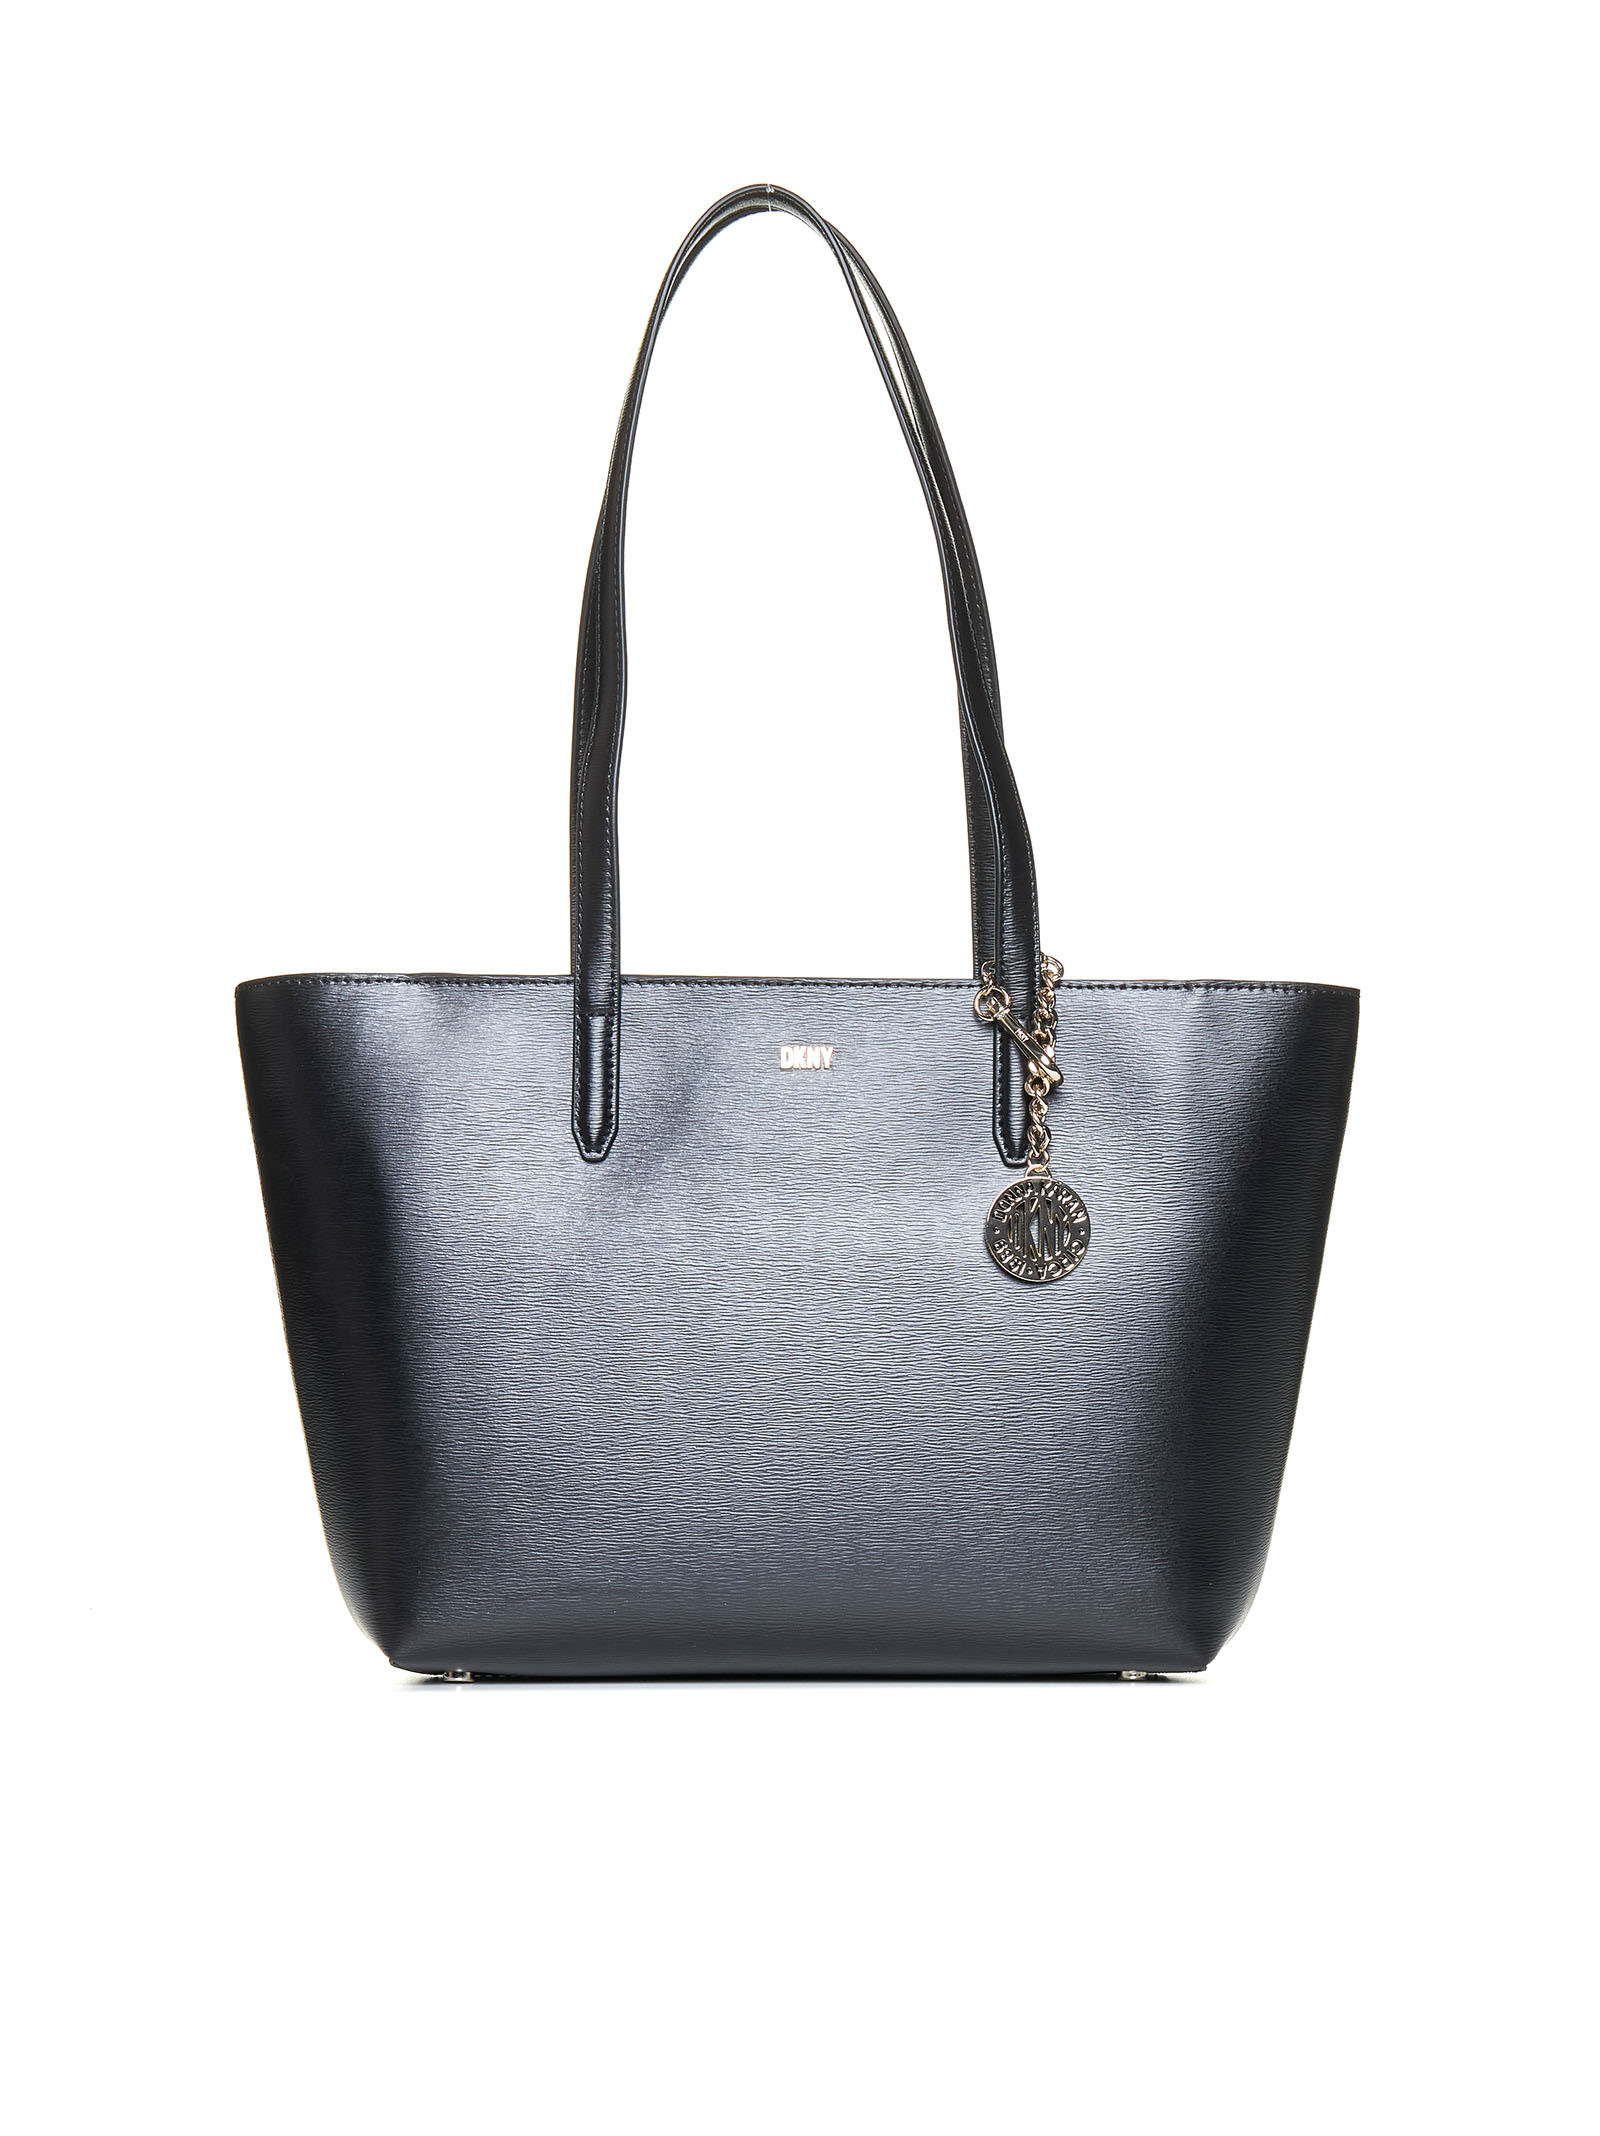 Shop Dkny Tote In Black/gold